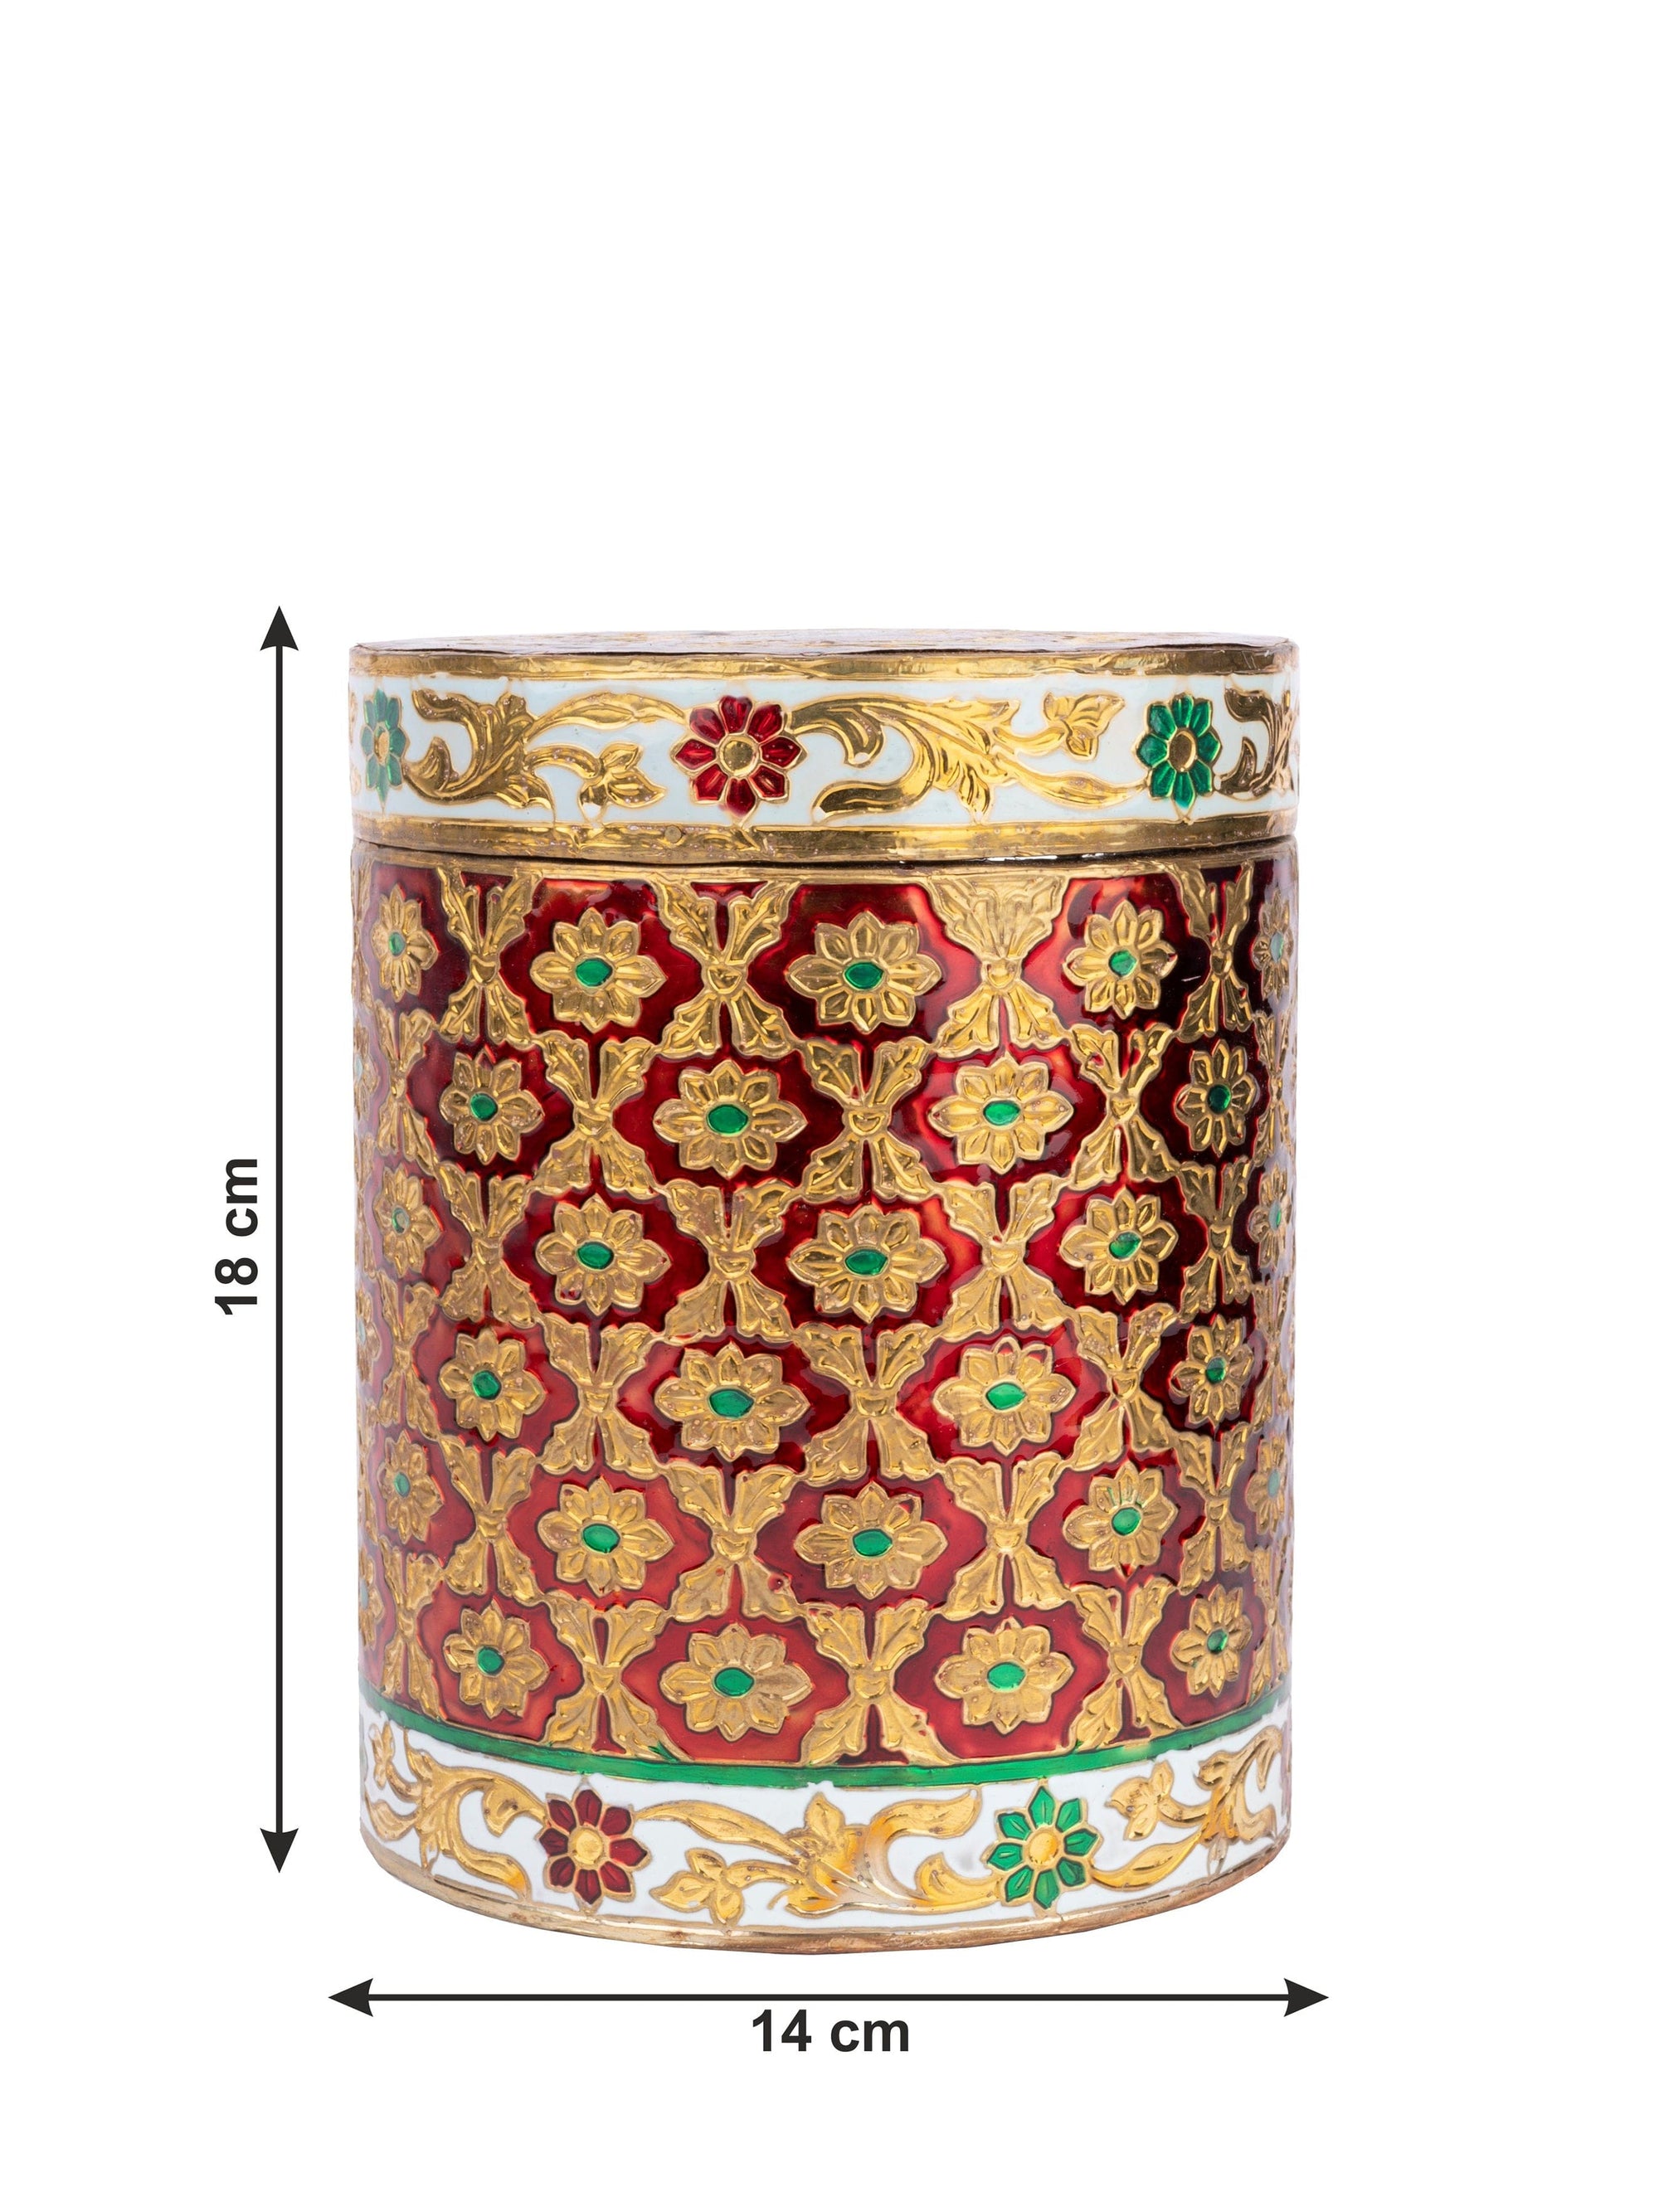 Meenakari Art Storage Jar / Canister / Container - 7 inches height - The Heritage Artifacts